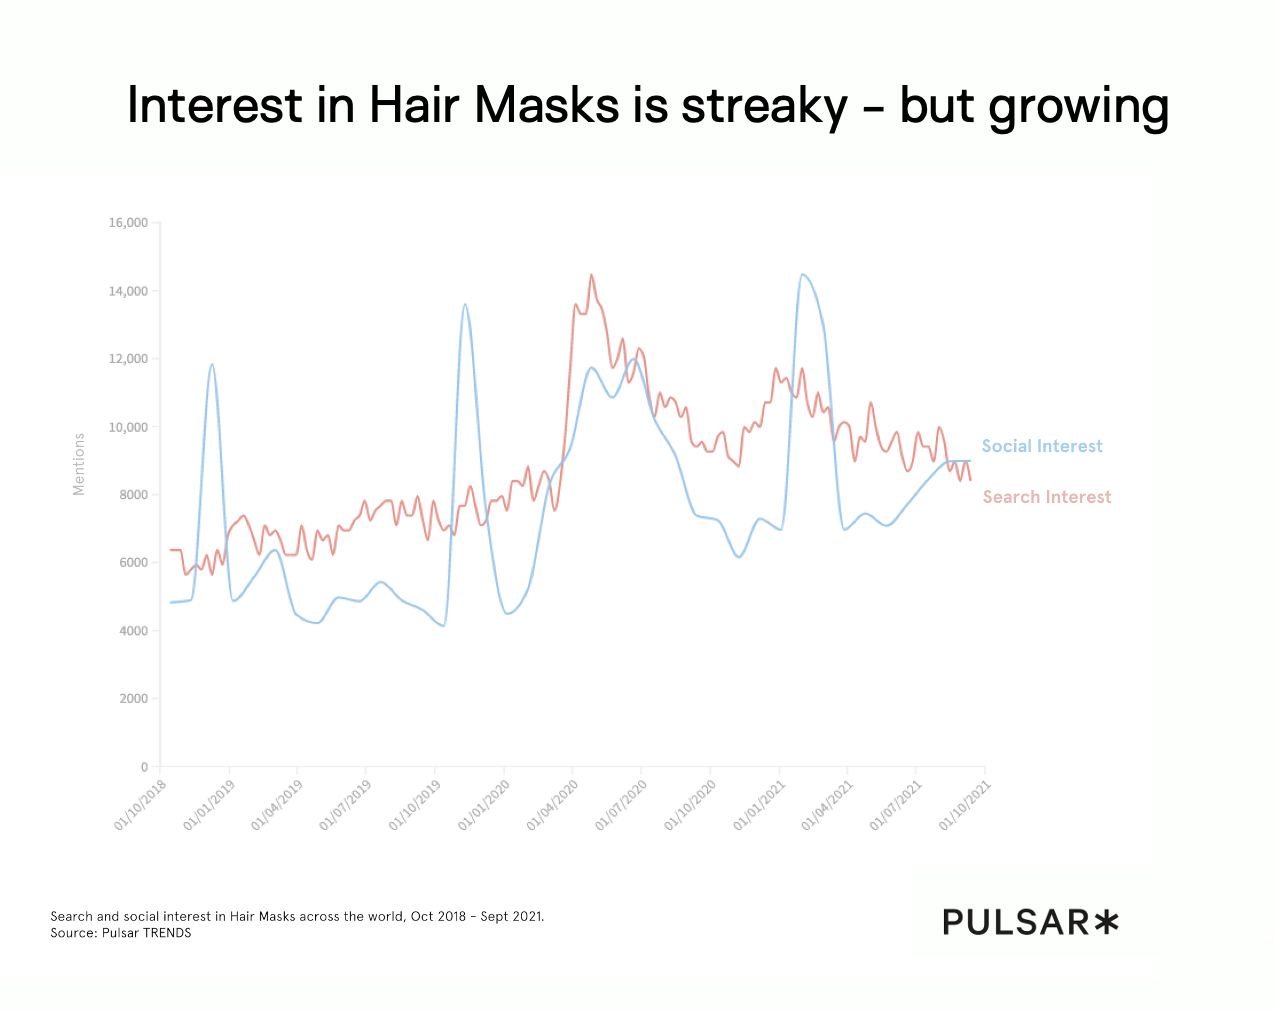 Interest in Hair Masks is streaky - but growing